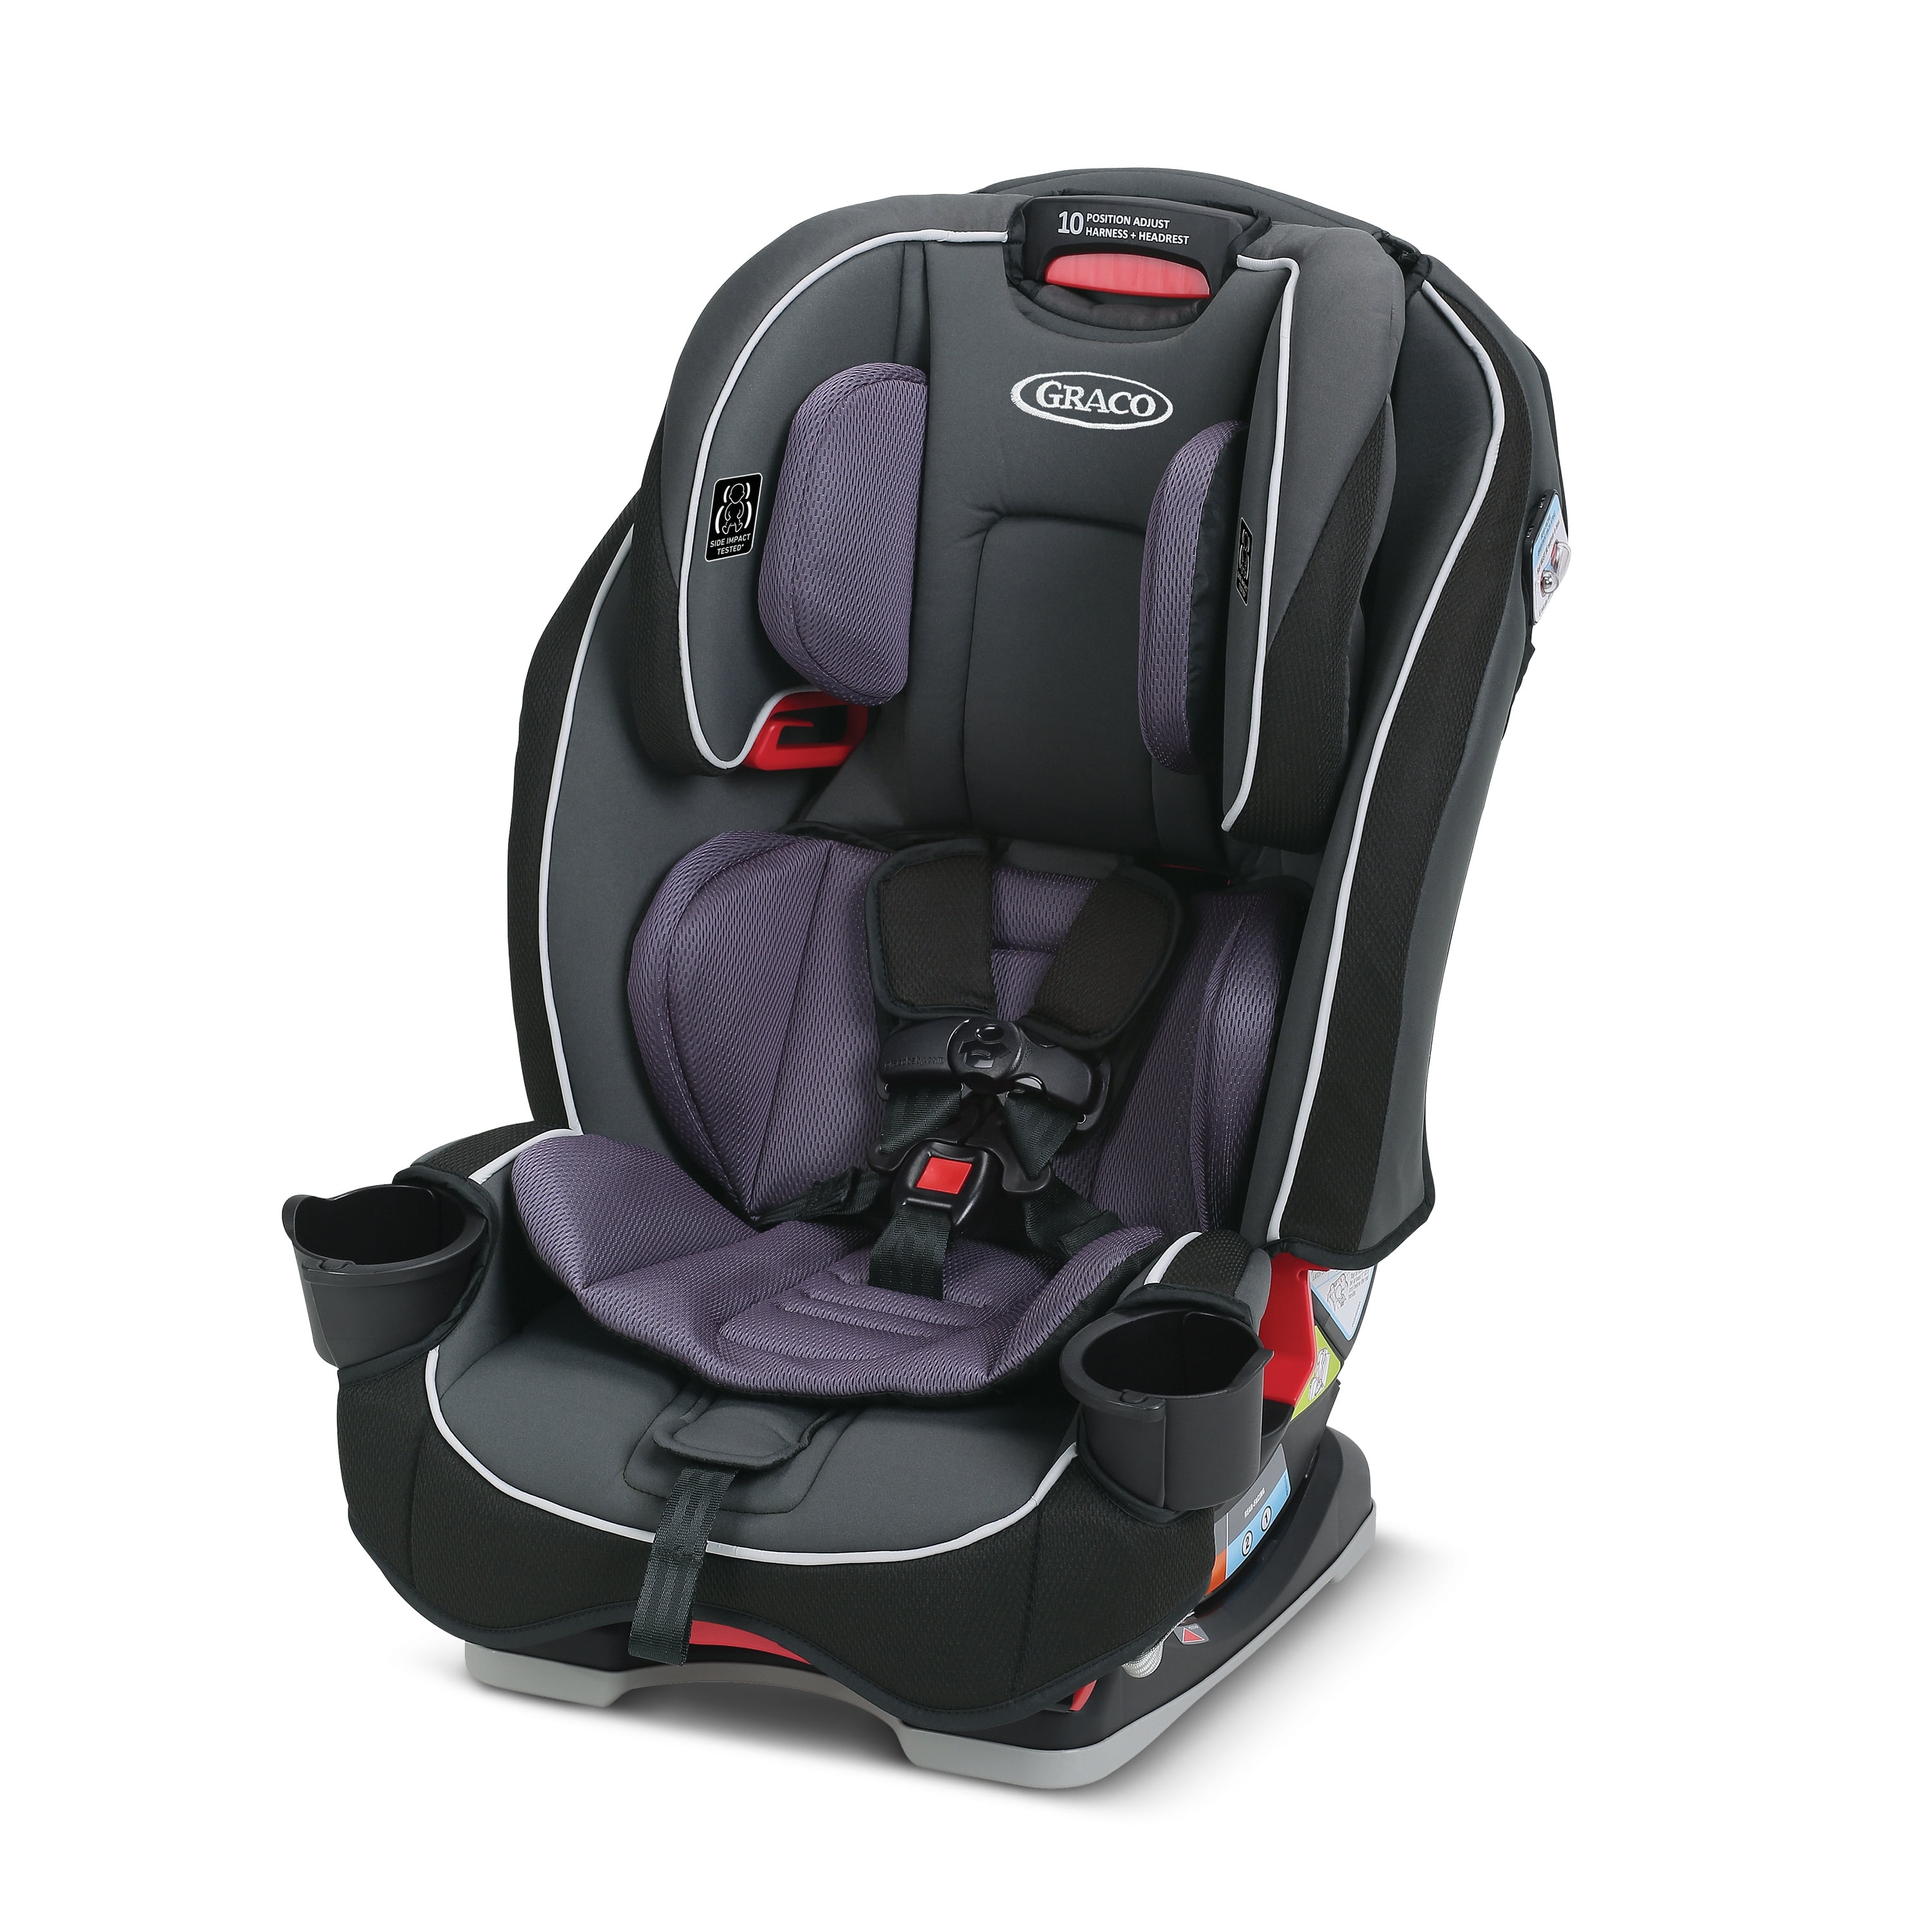 Graco SlimFit 3in1 Car Seat, Saves Space in Your Back